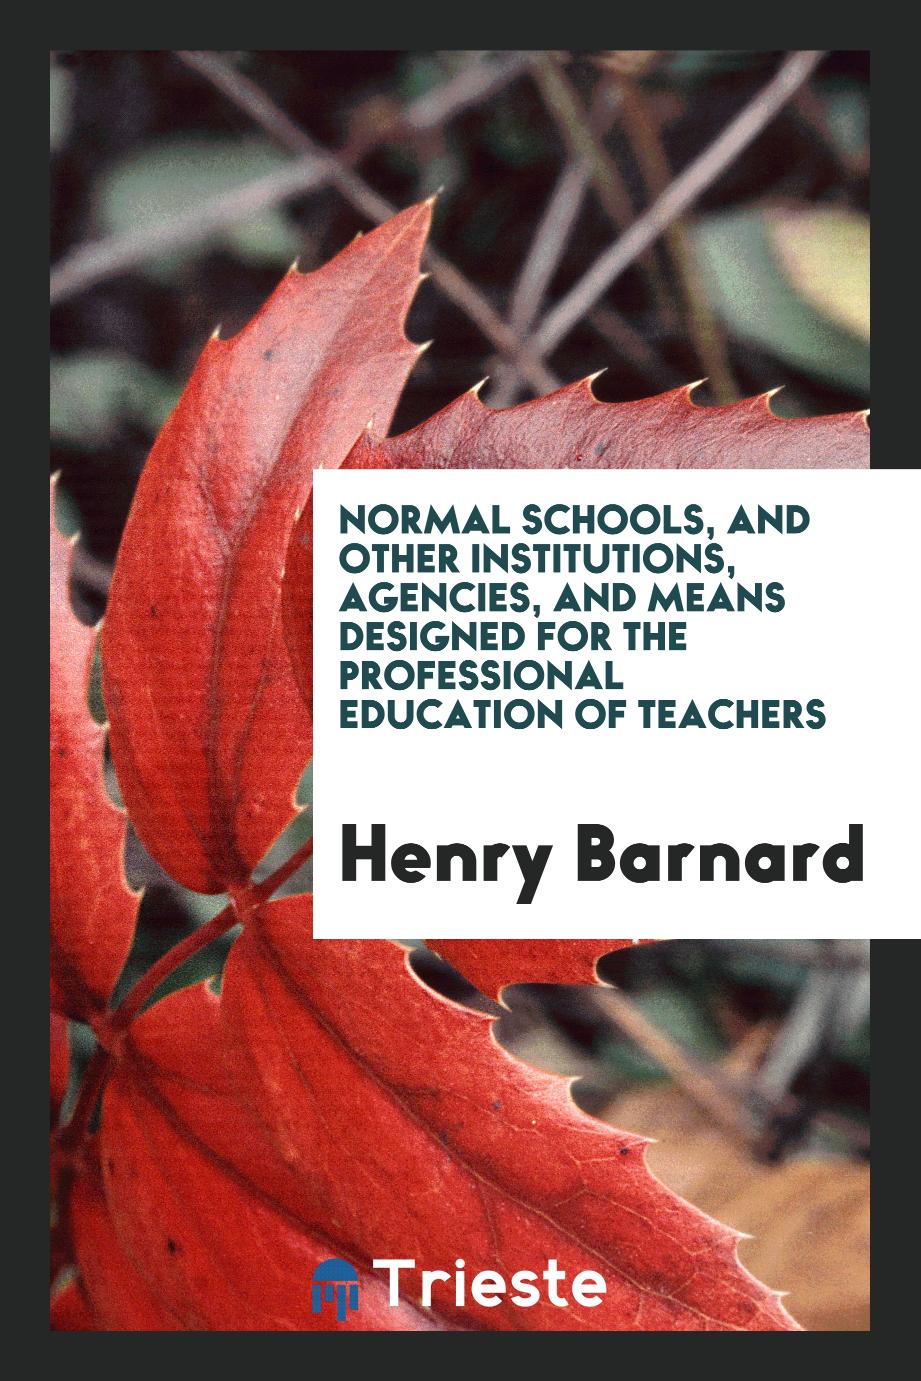 Normal schools, and other institutions, agencies, and means designed for the professional education of teachers